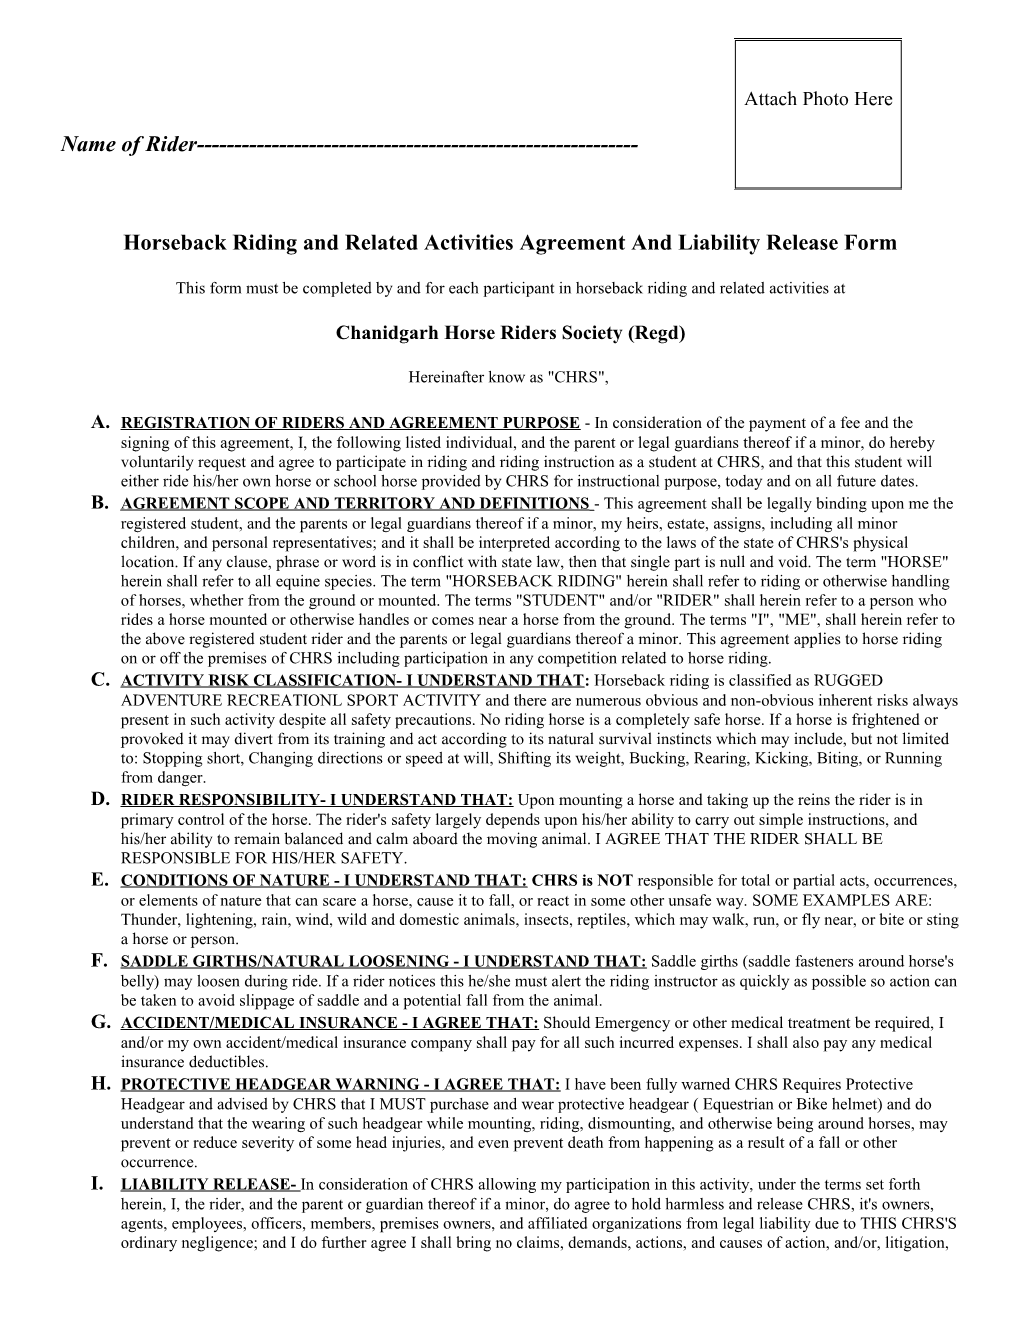 Horseback Riding and Related Activities Agreement and Liability Release Form